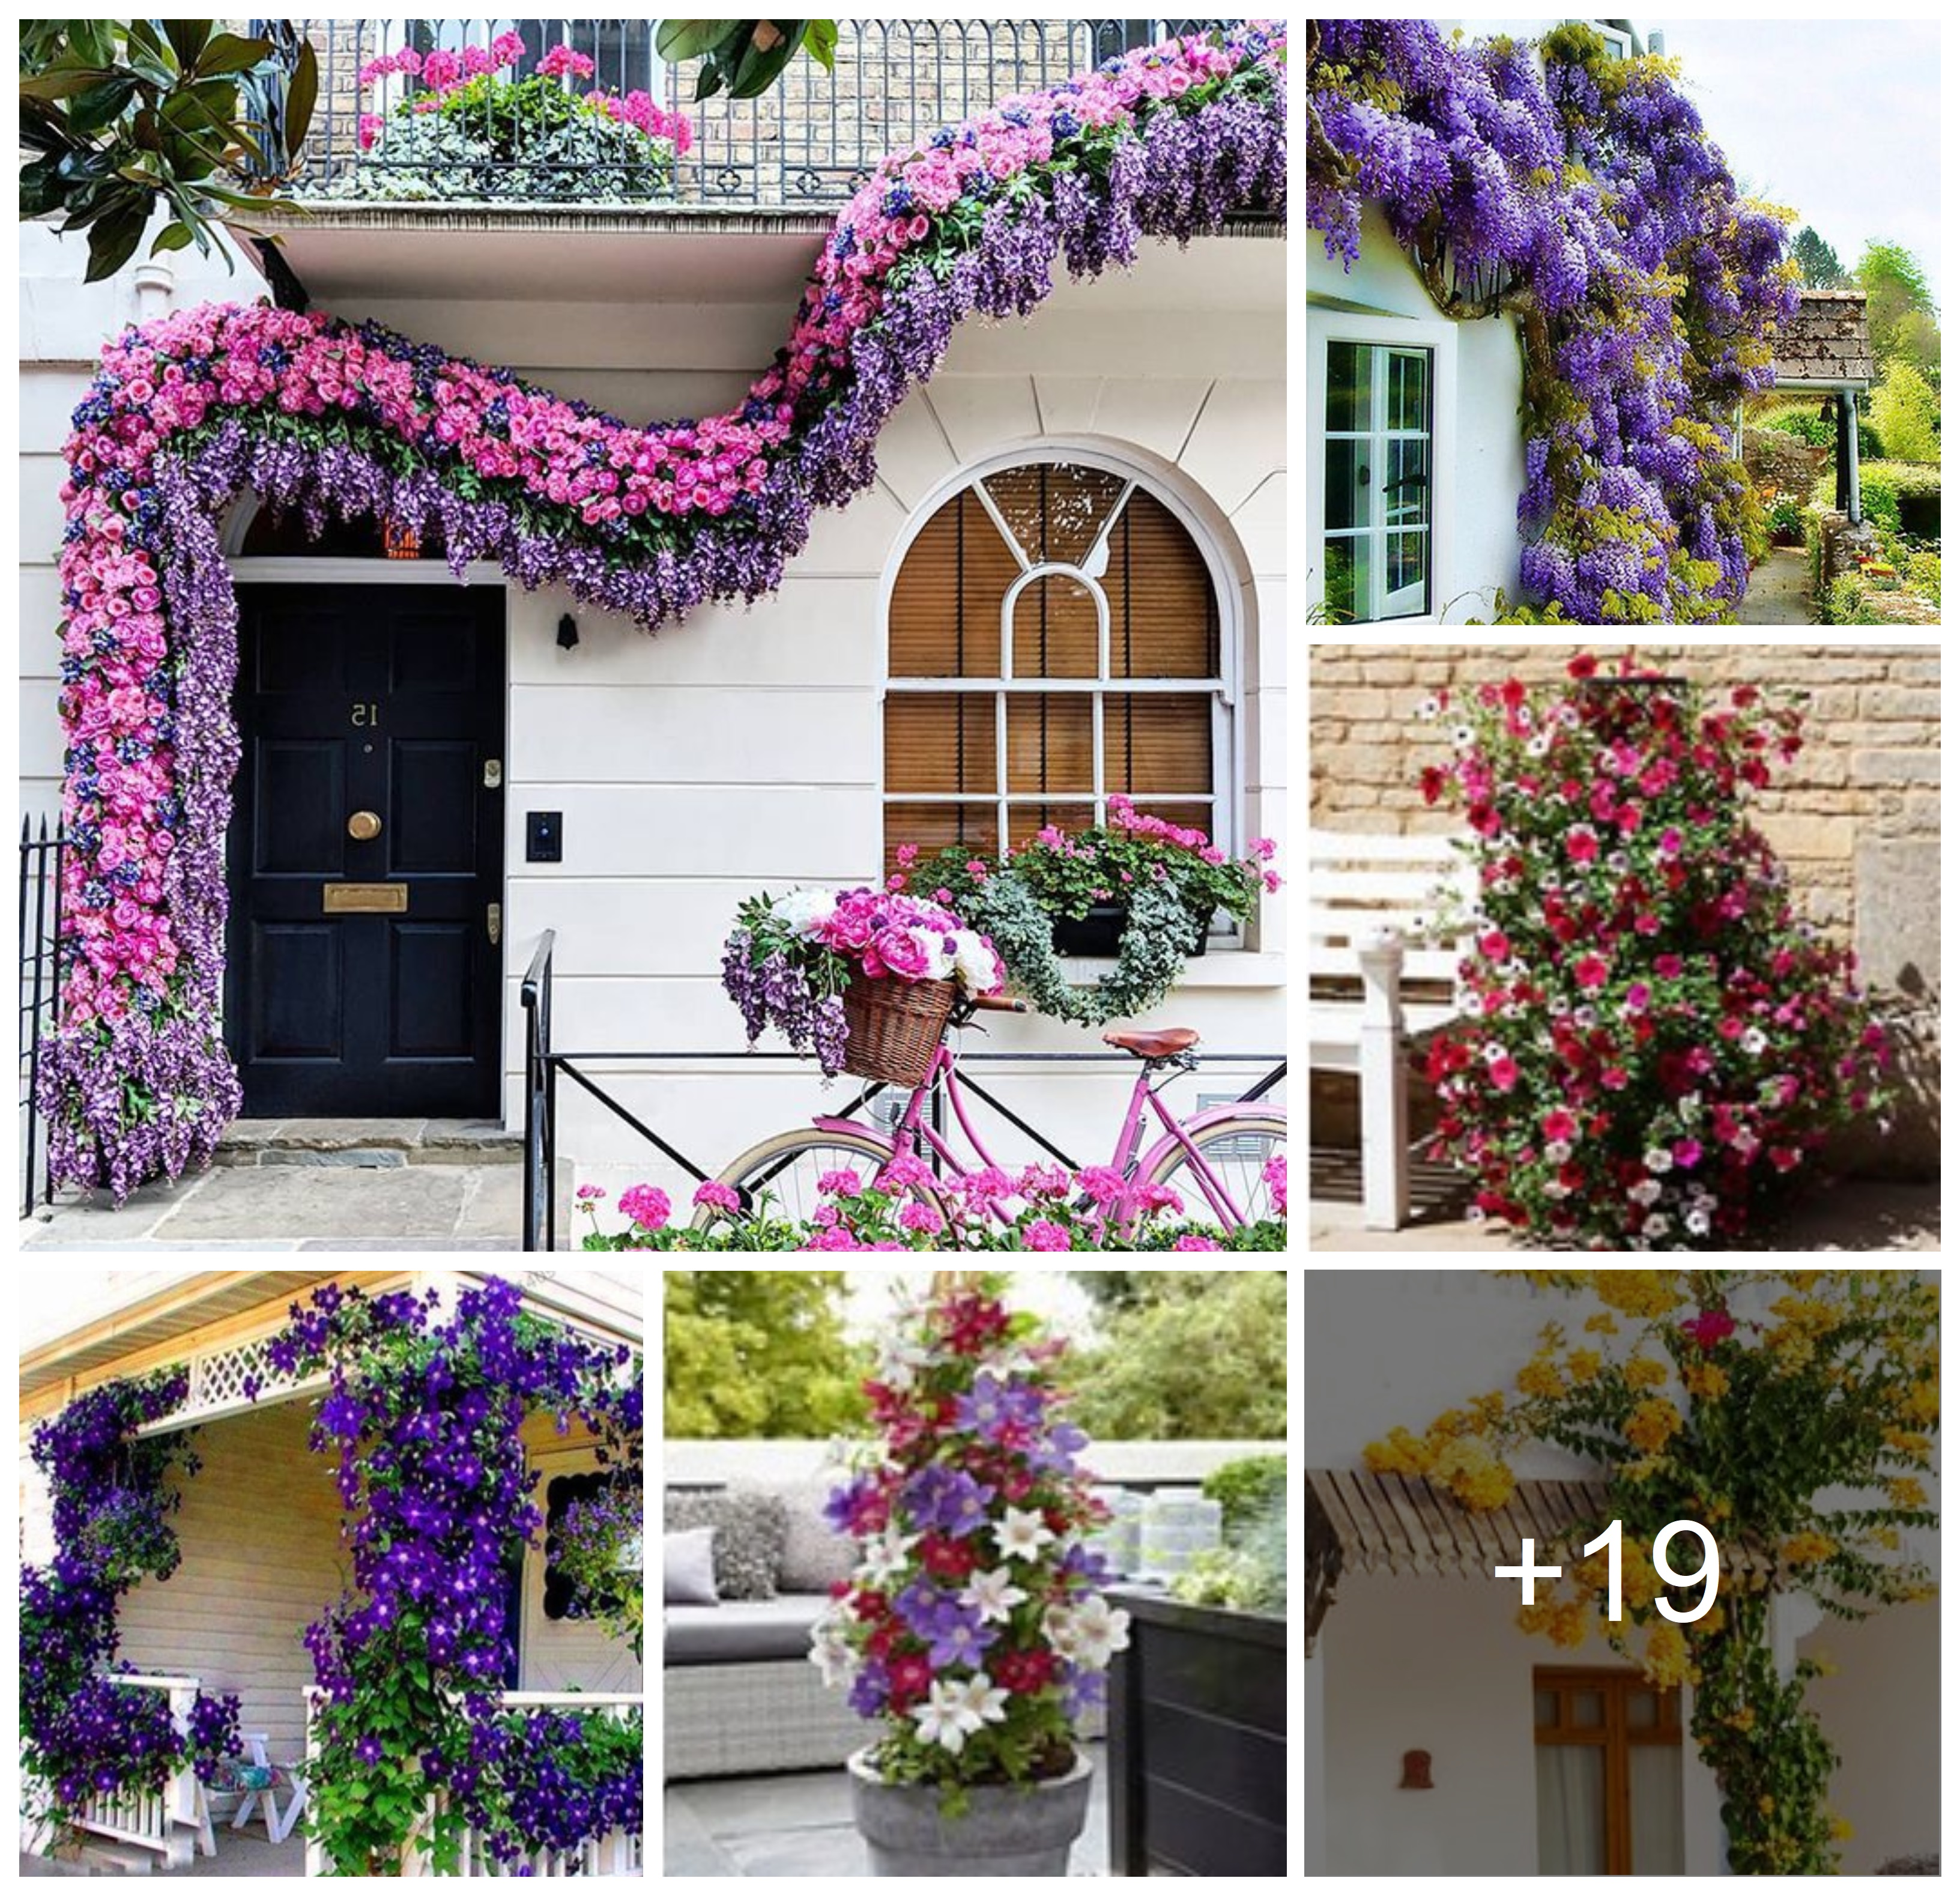 Add beauty to your porch or pergola with clematis flowers